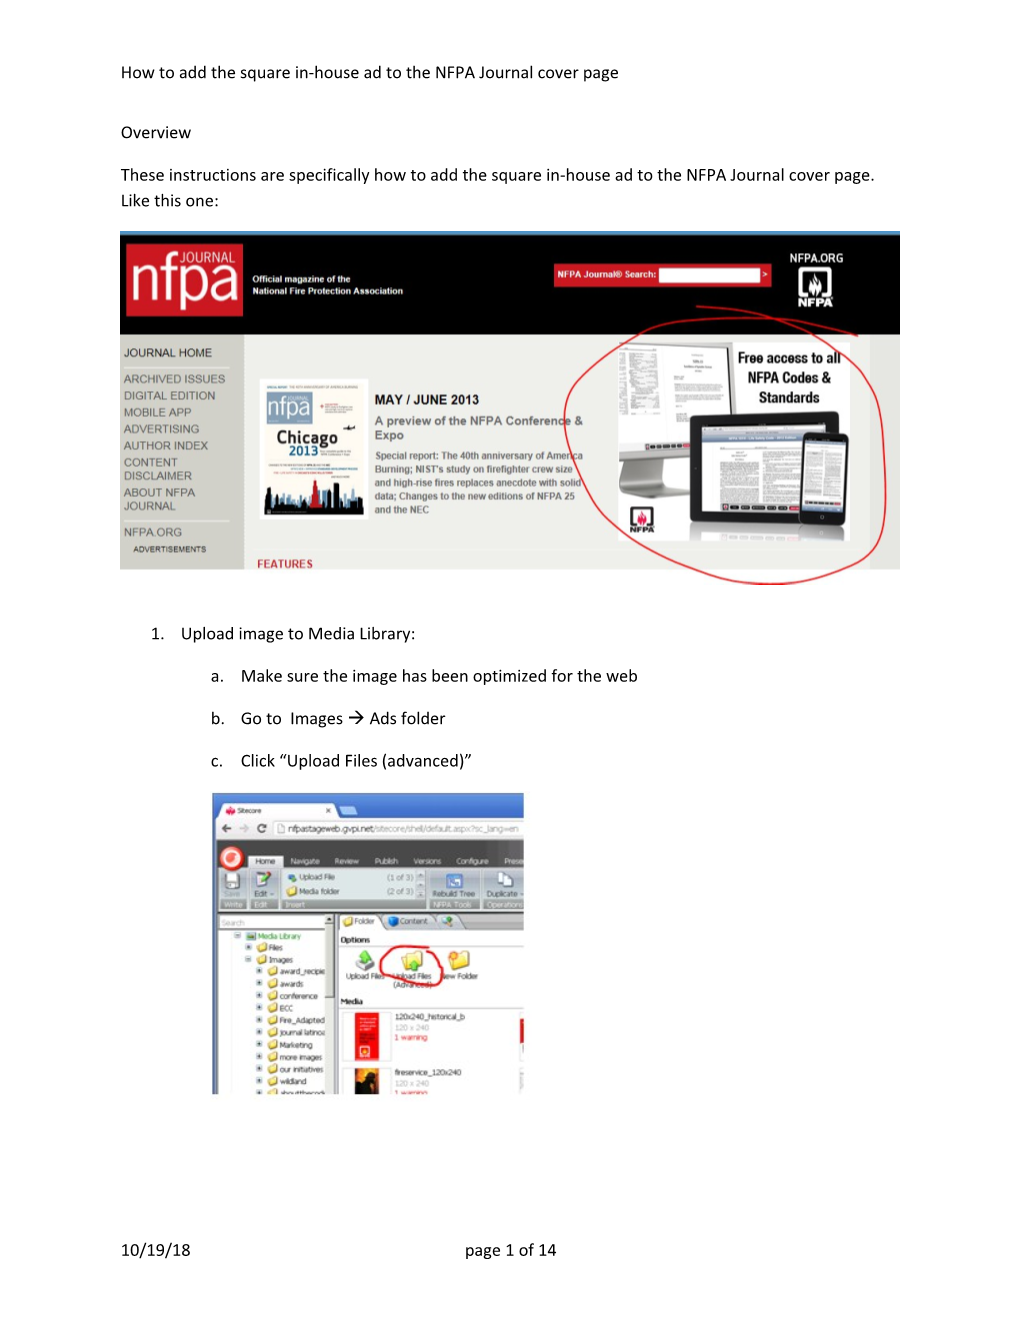 How to Add the Square In-House Ad to the NFPA Journal Cover Page